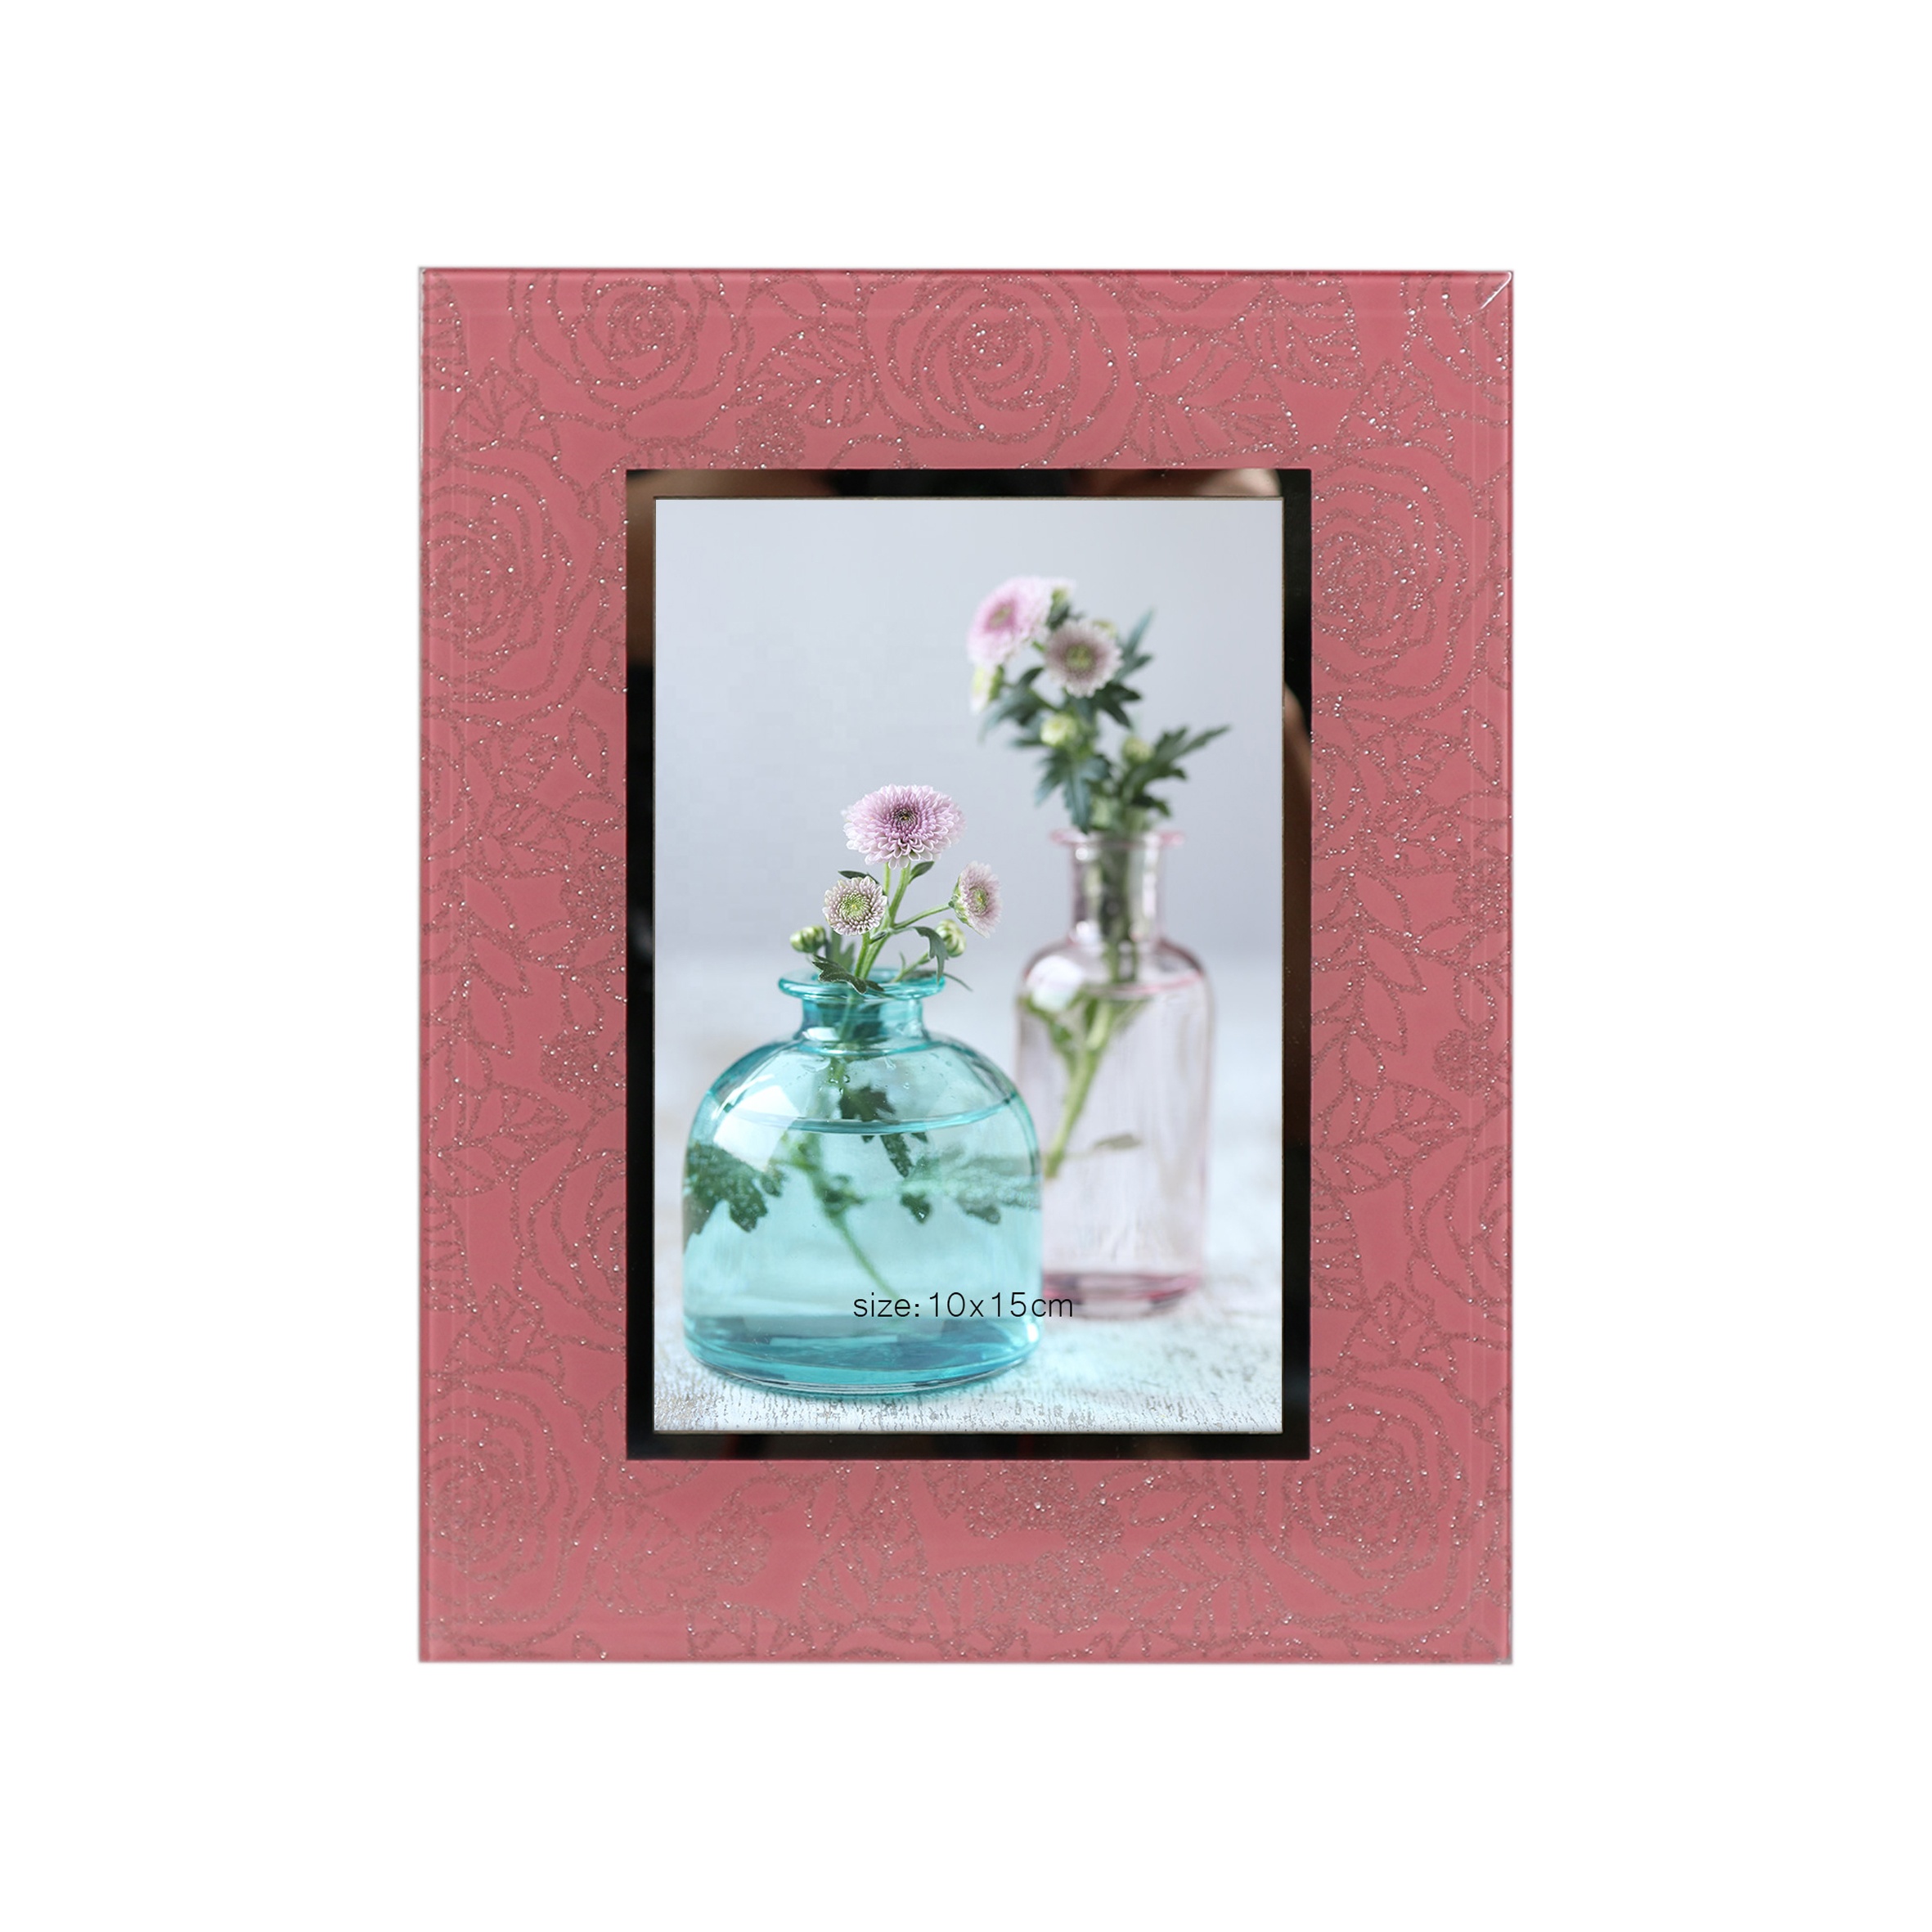 Glass photo frame wall art framed picture with silver rose Decor 4x6 inch frame